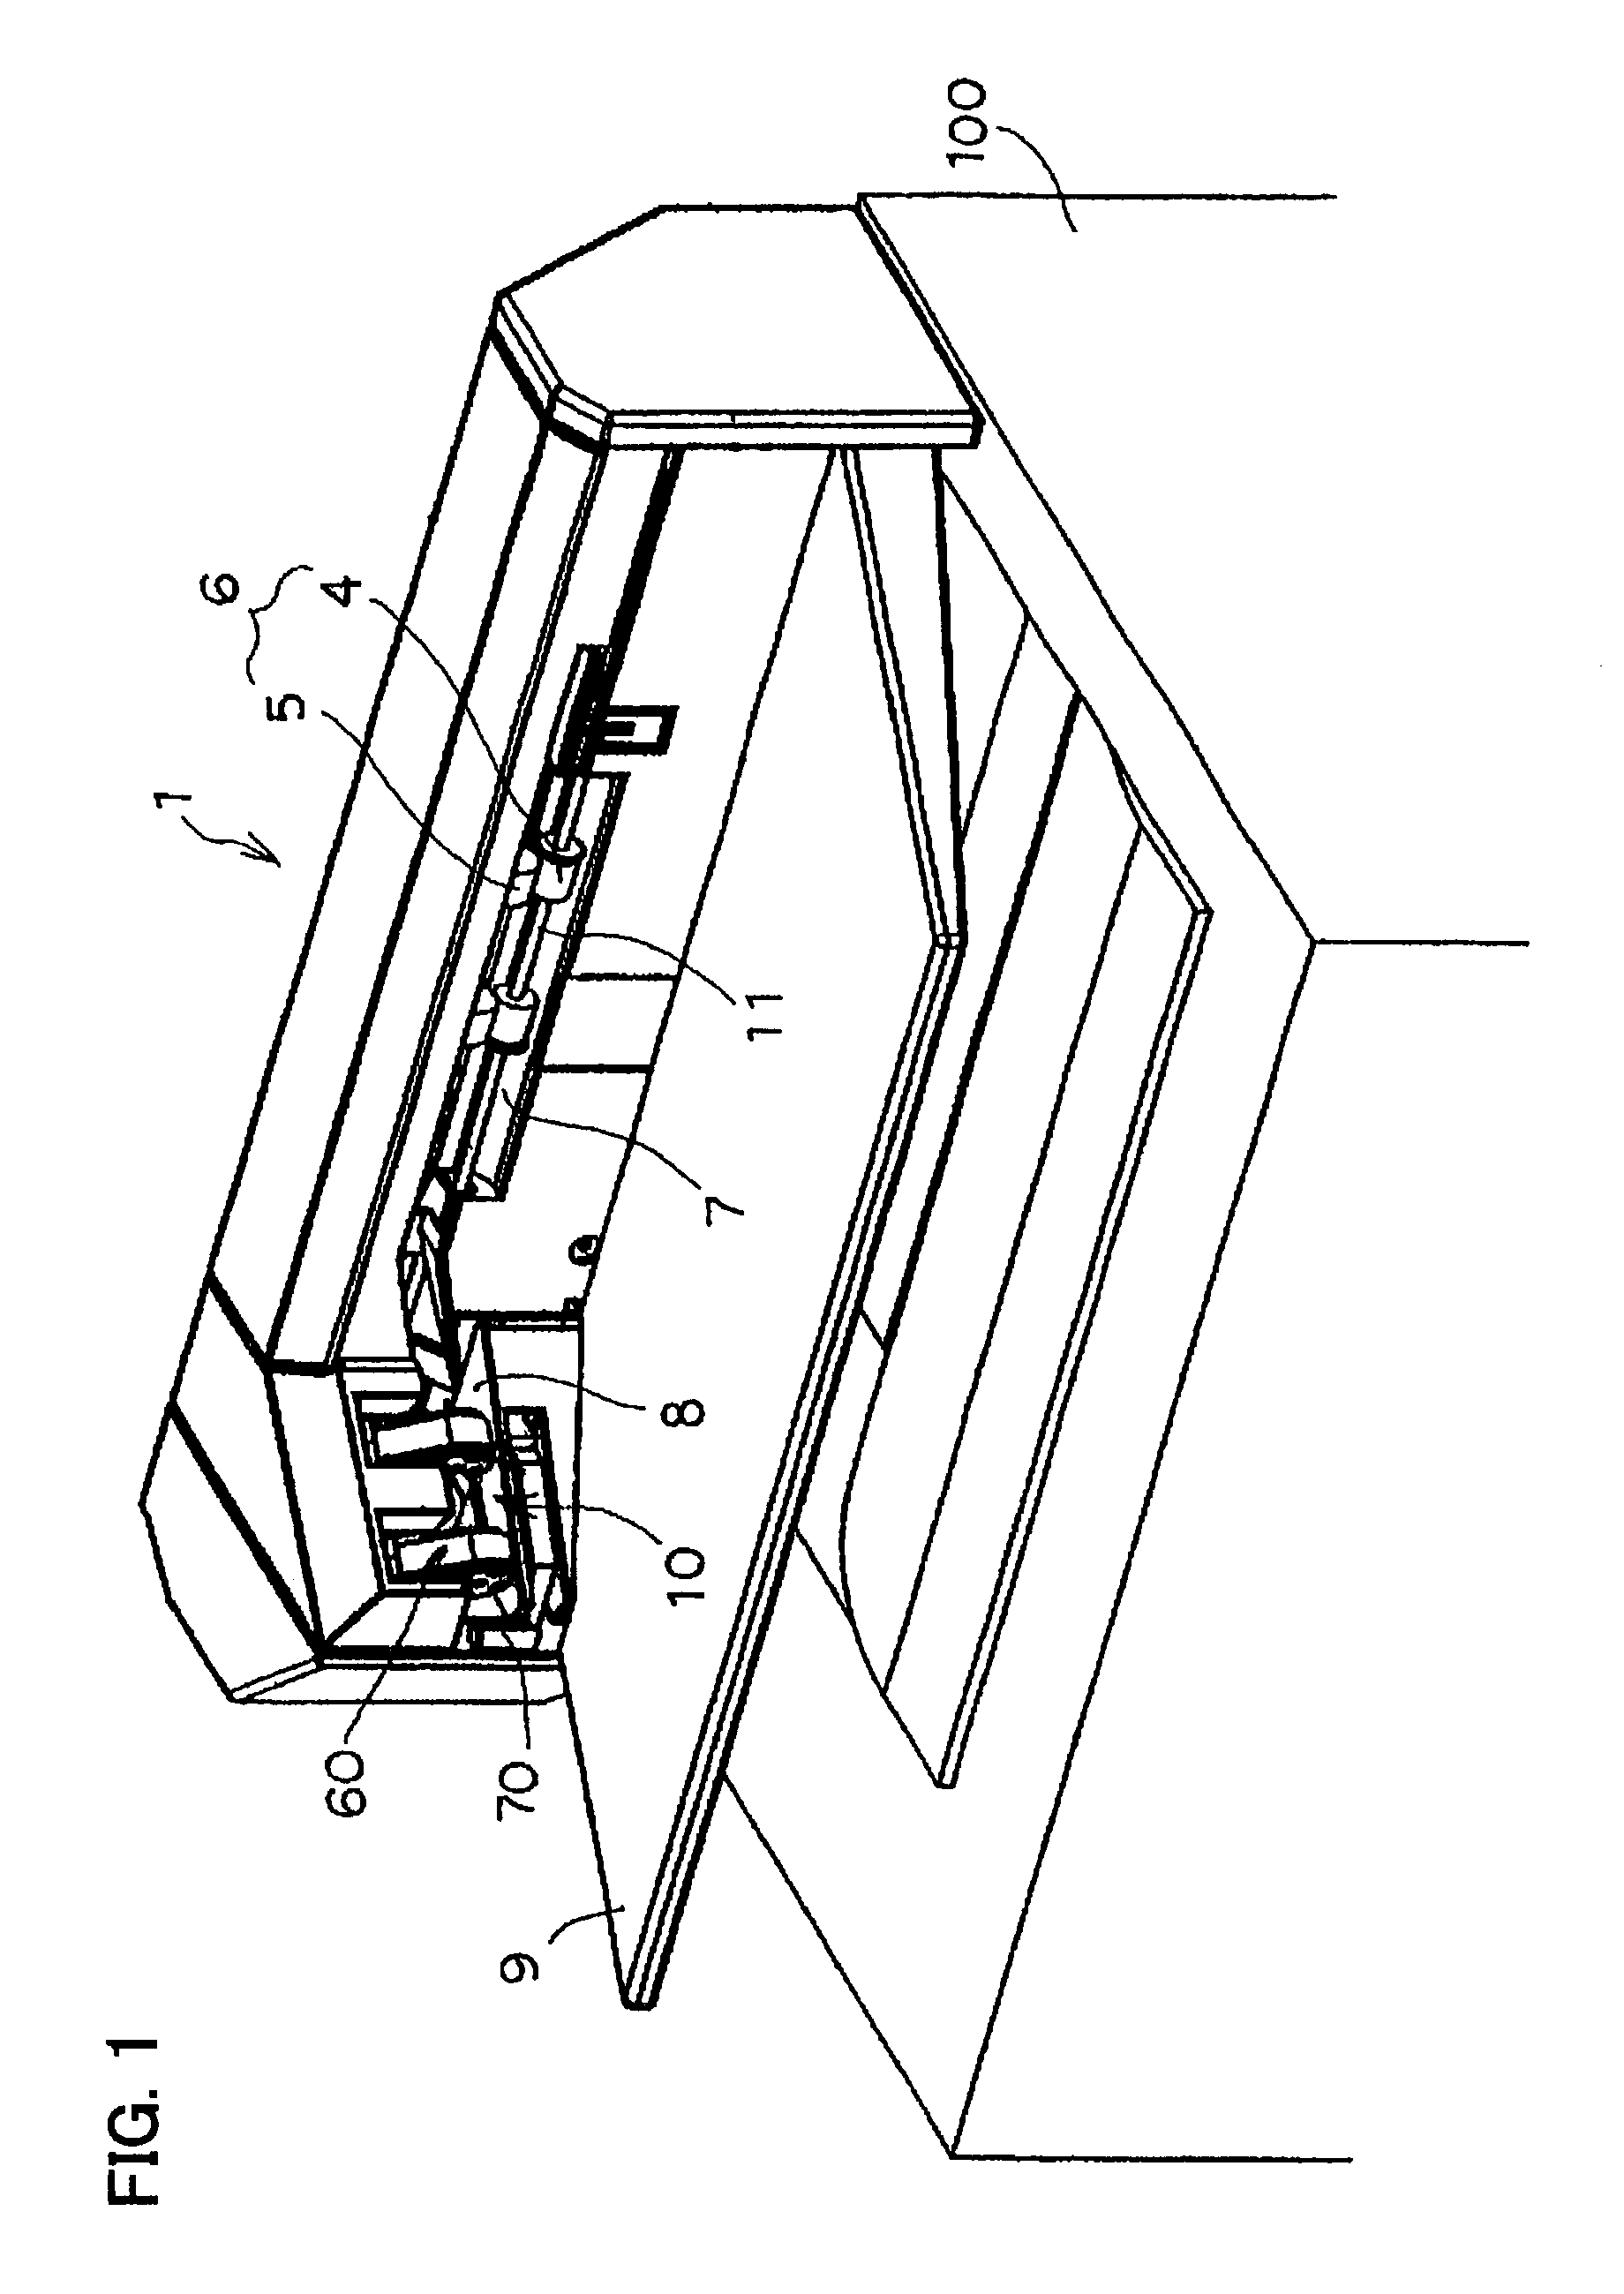 Offsetting discharging apparatus with aligning member